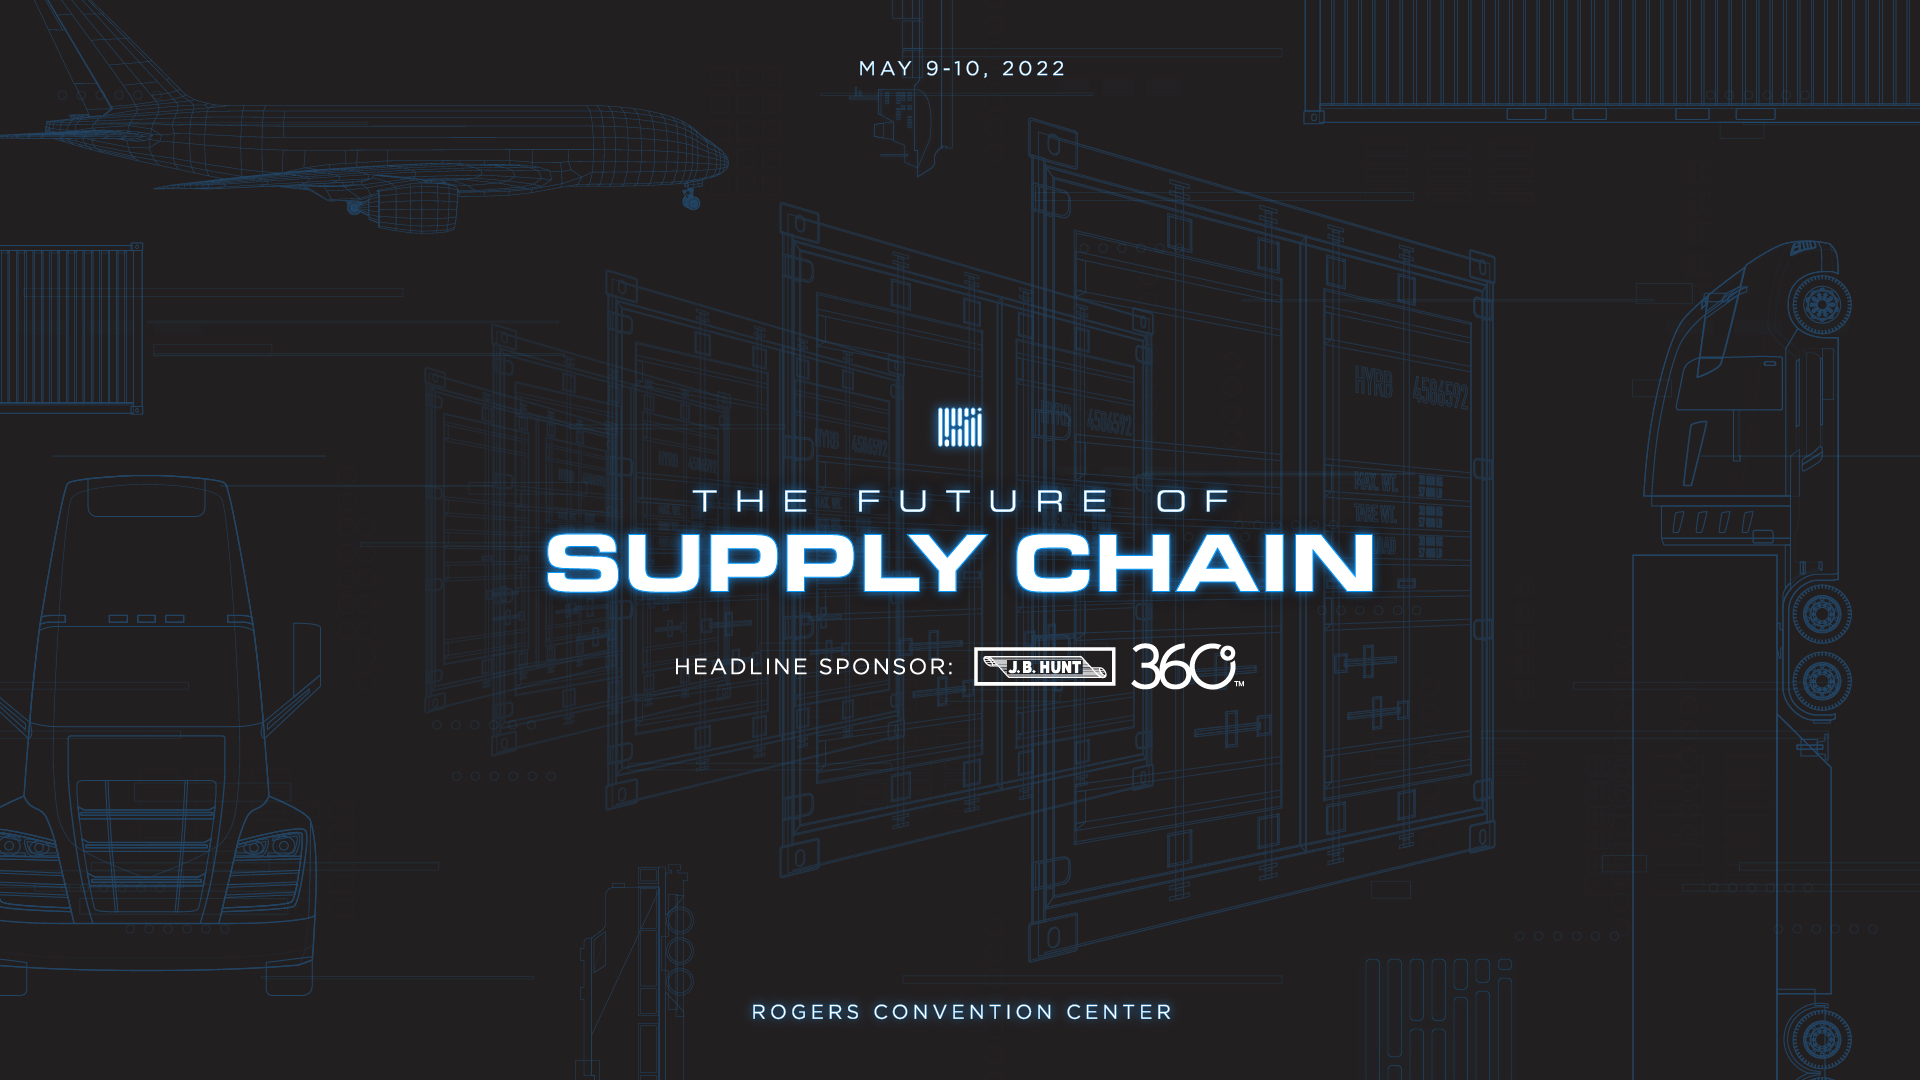 4 keynote speakers on tap for The Future of Supply Chain FreightWaves